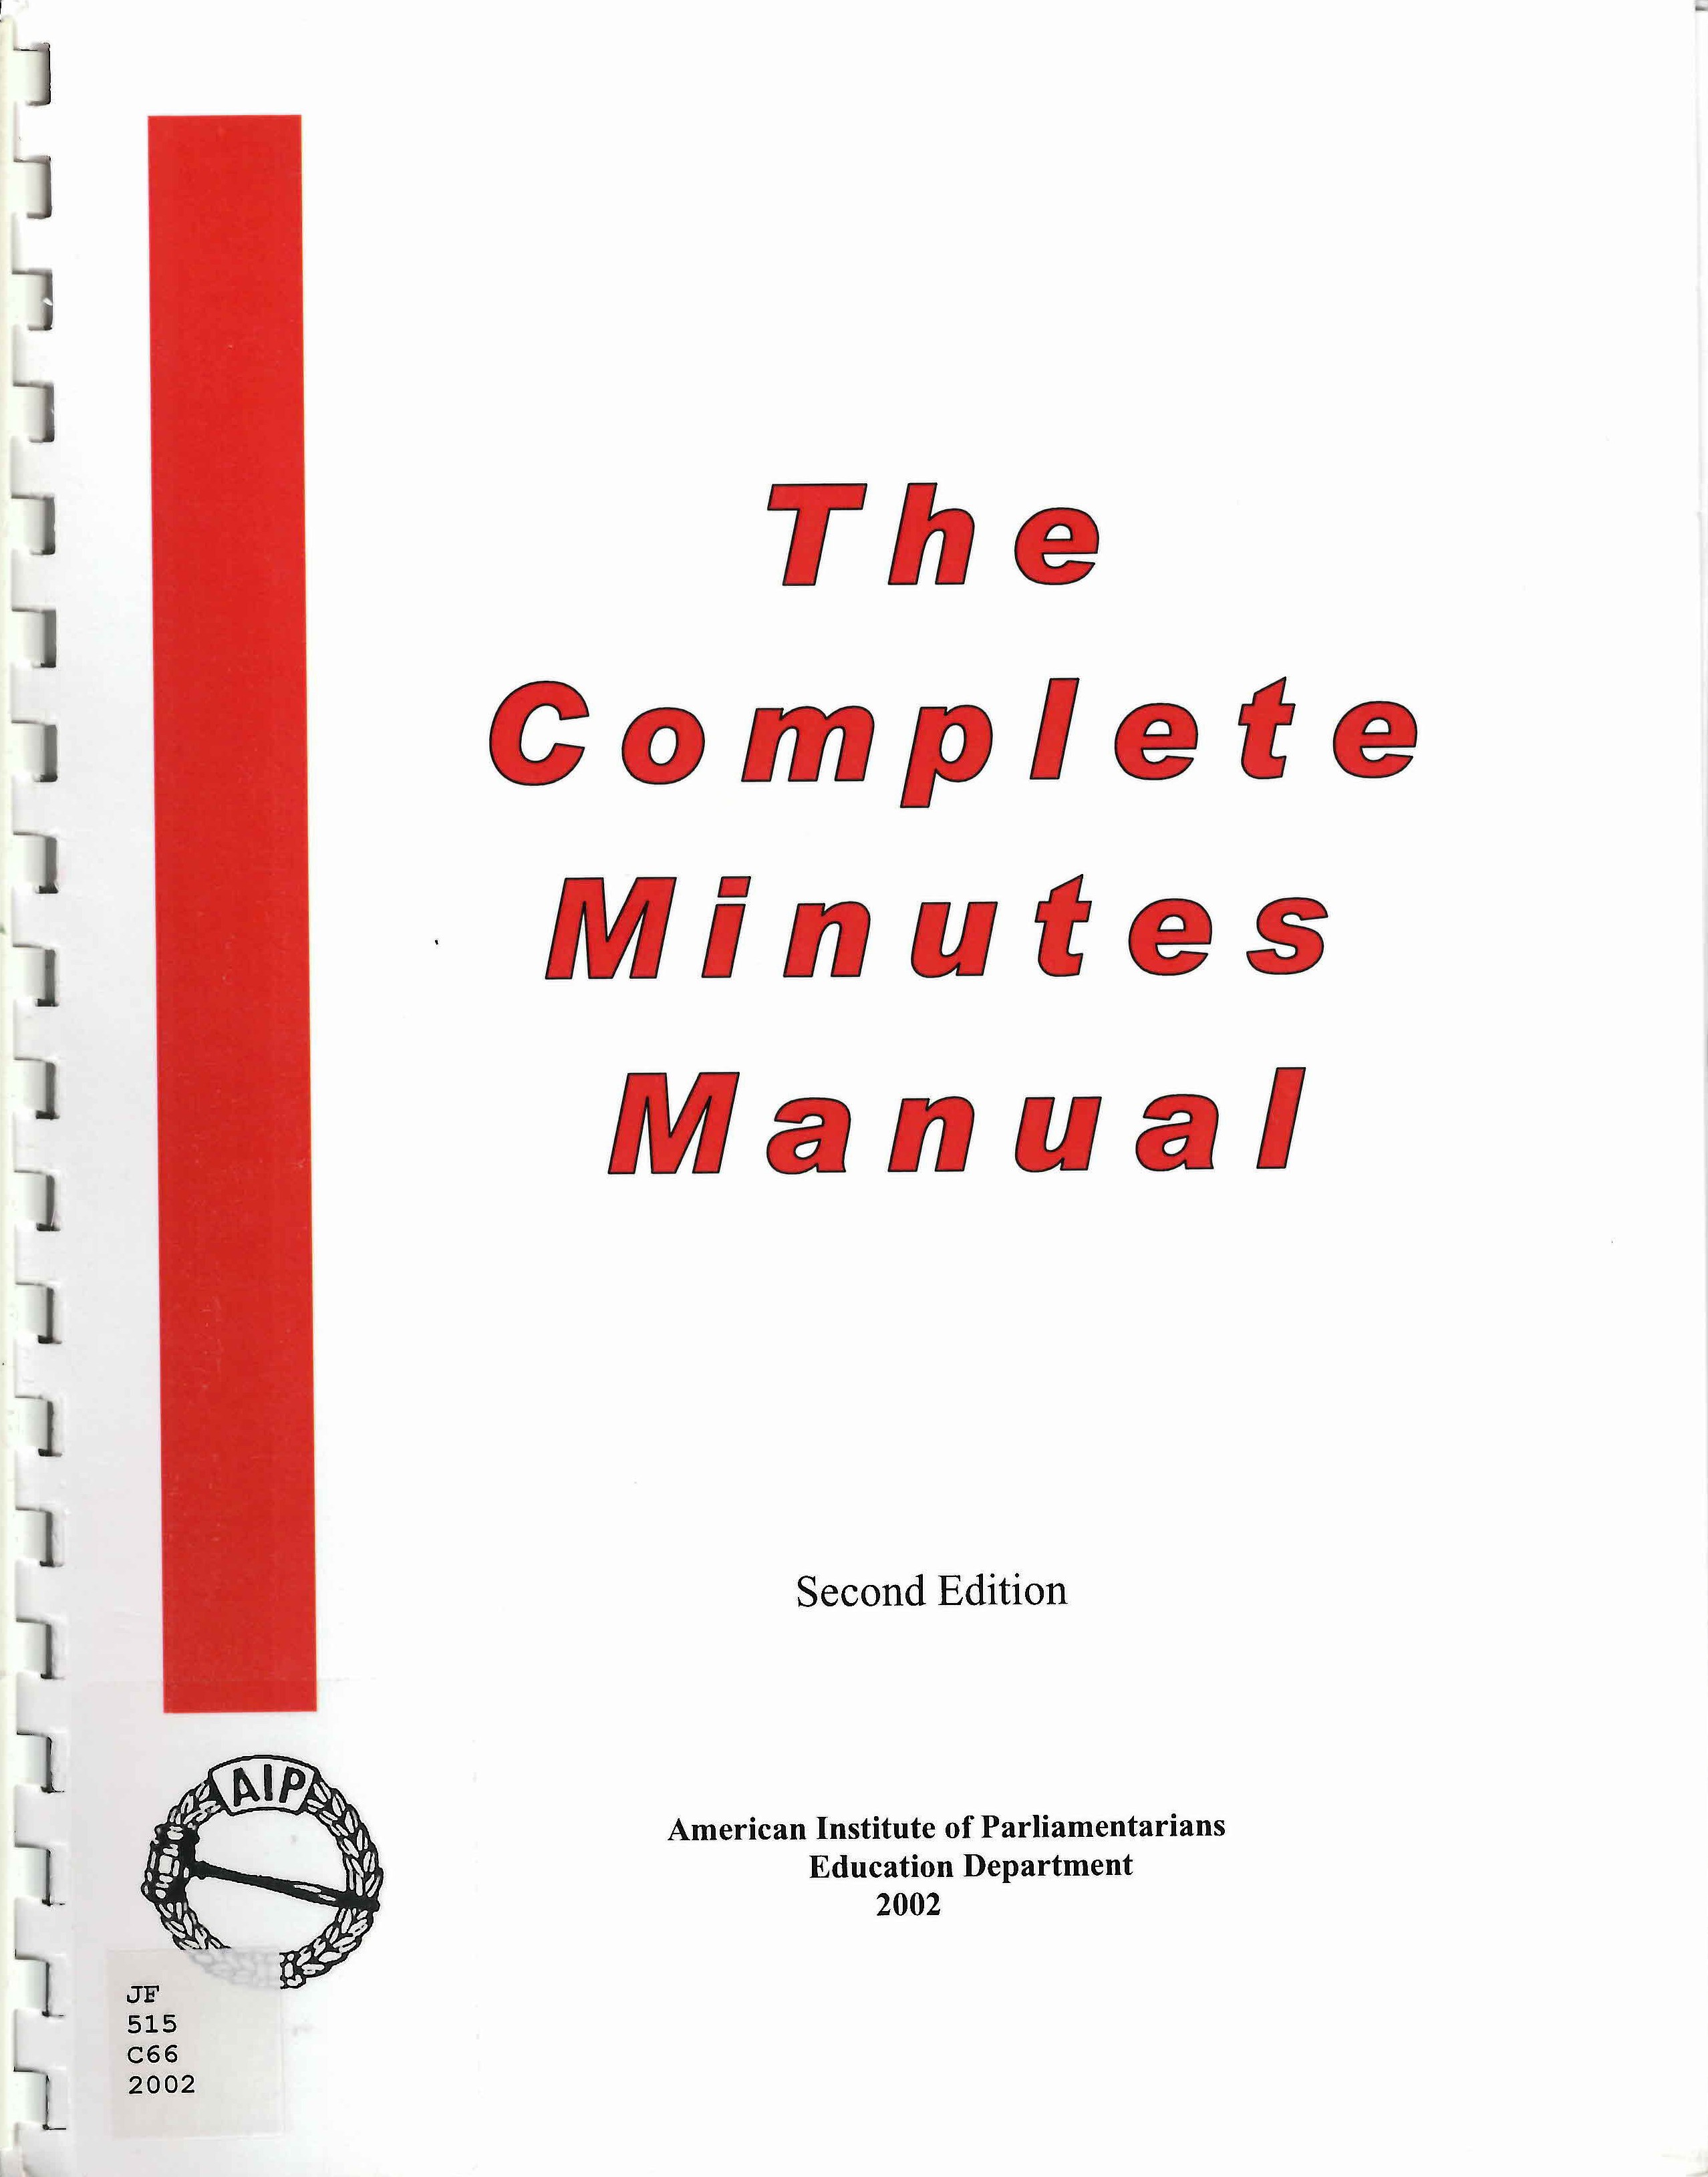 The complete minutes manual